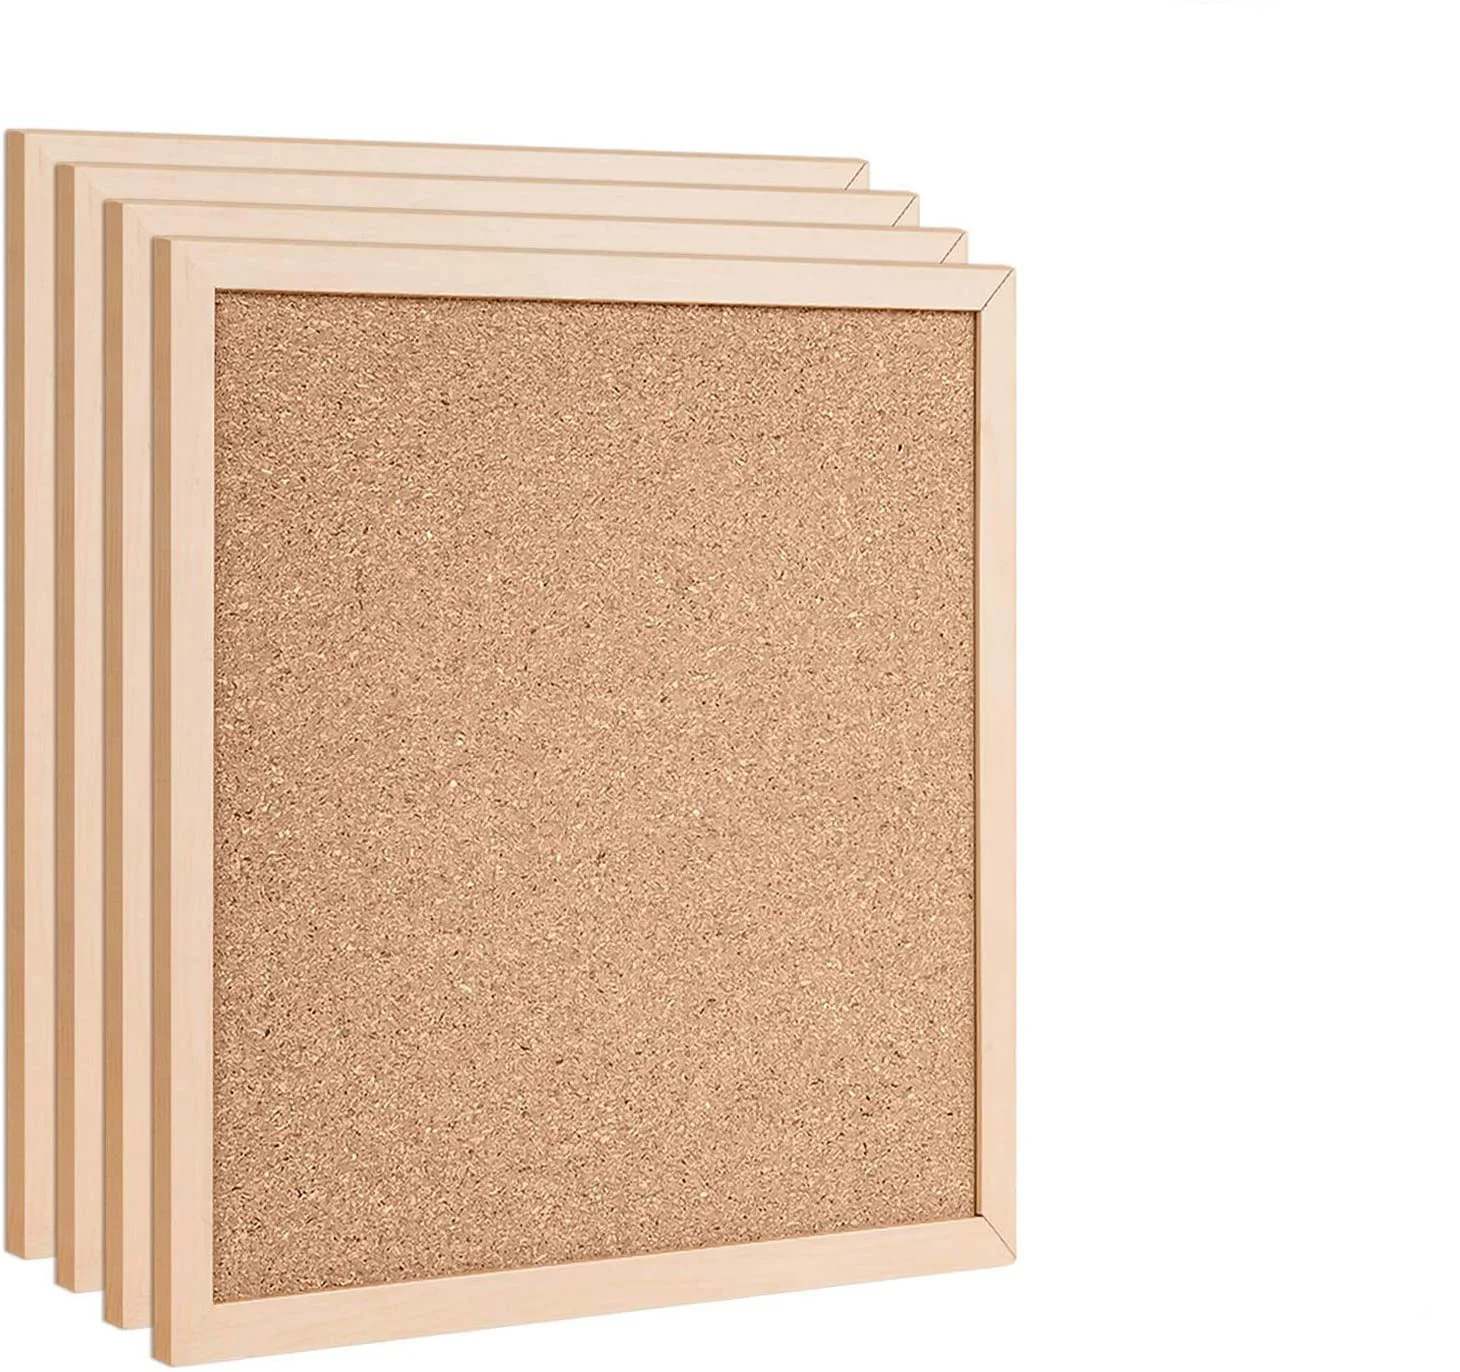 Home Holiday Decor White, 1212in Corkboards for Wall Cork Board Bulletin Board for Walls with Frame Cork Board Tiles,12X 12 Thick Square Wall Tiles Small Framed Cork Tiles for Office,School 